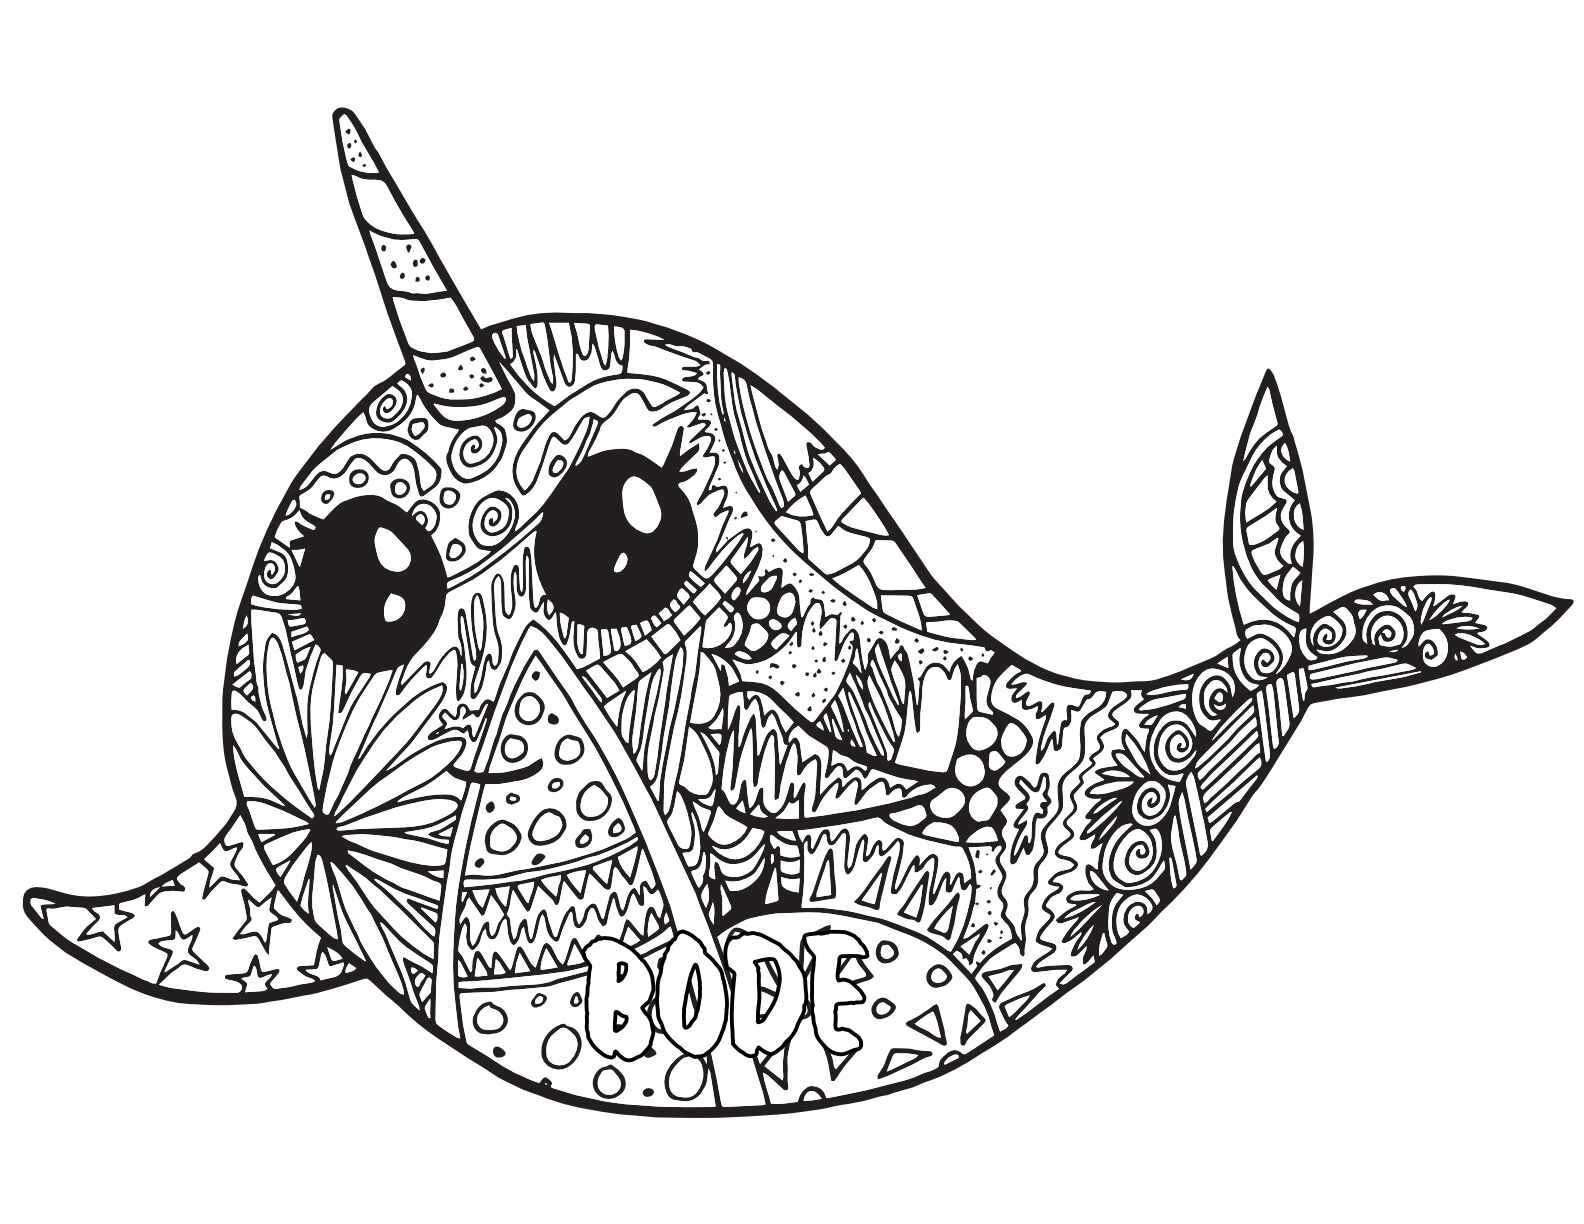 3 Free BODE Printable Coloring PagesCLICK HERE TO DOWNLOAD THE PAGE ABOVE